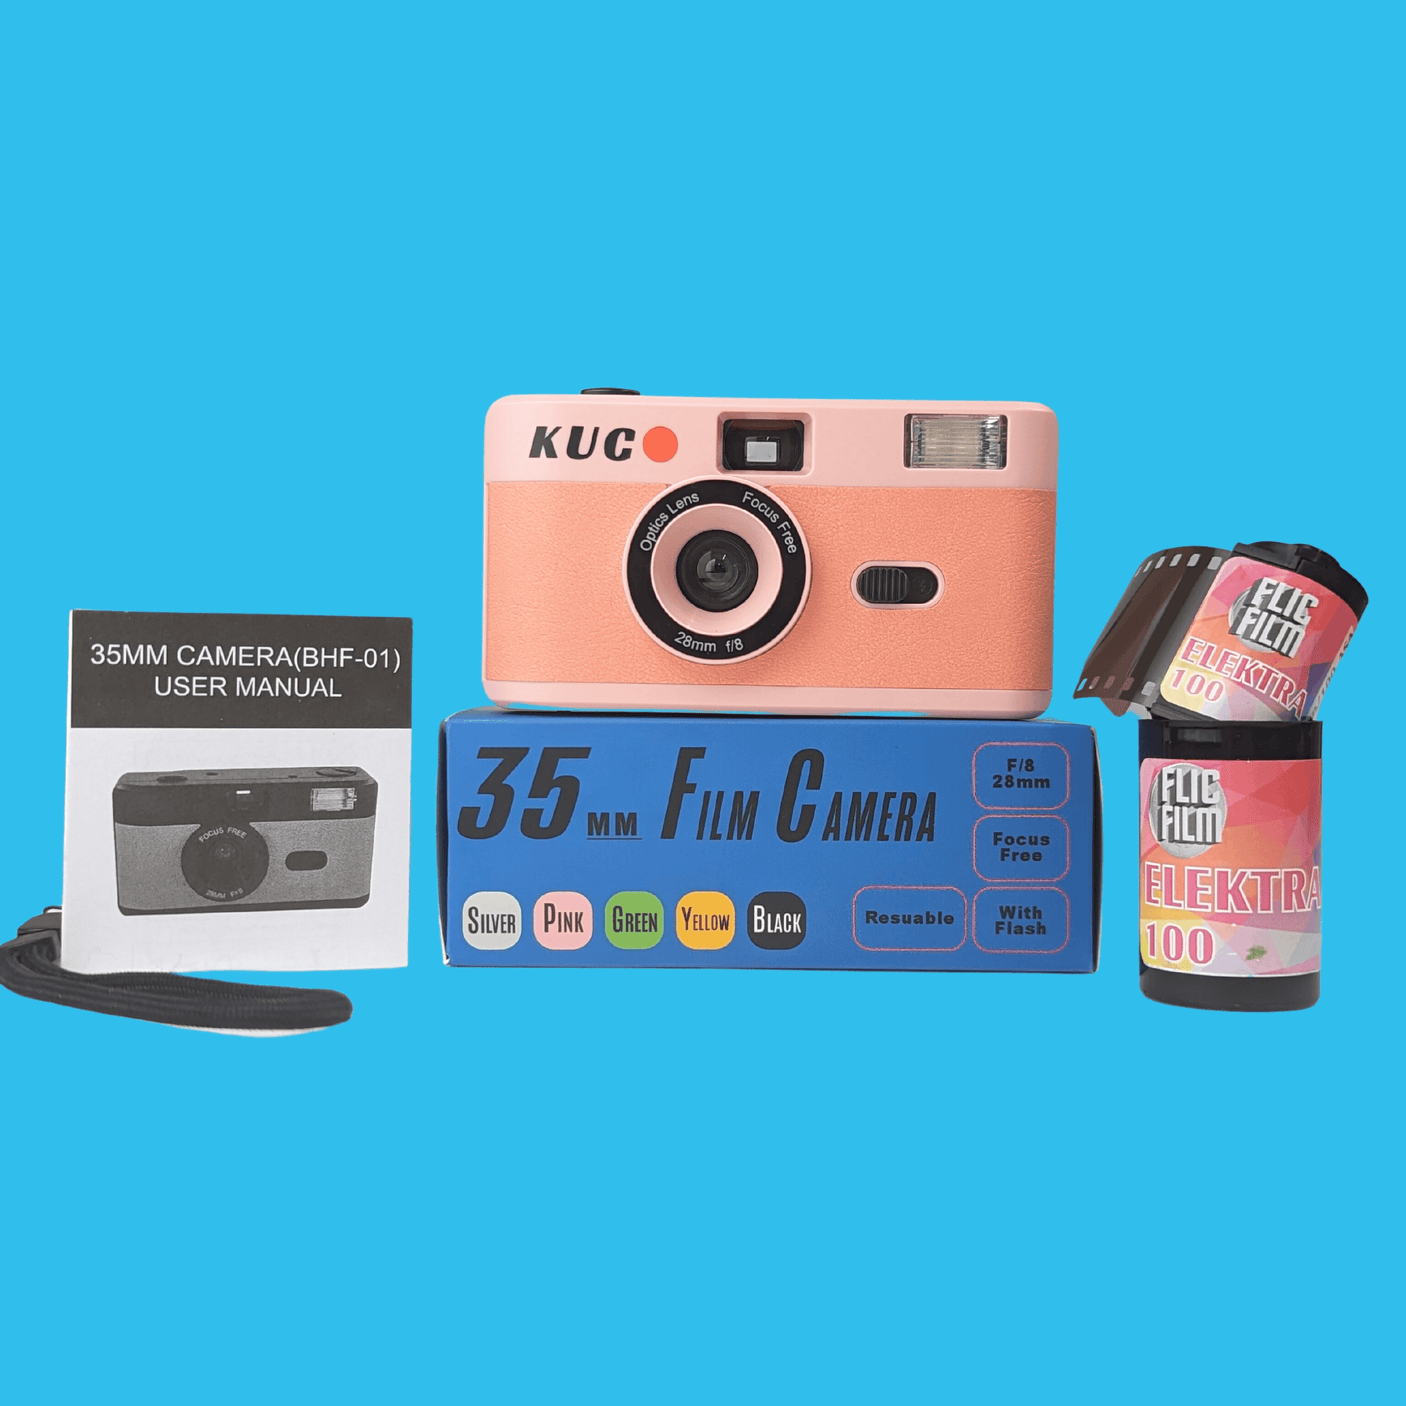 35mm Film Camera Reusable Starter Pack with Flash and 1 x 35mm Film - Pink KUGO